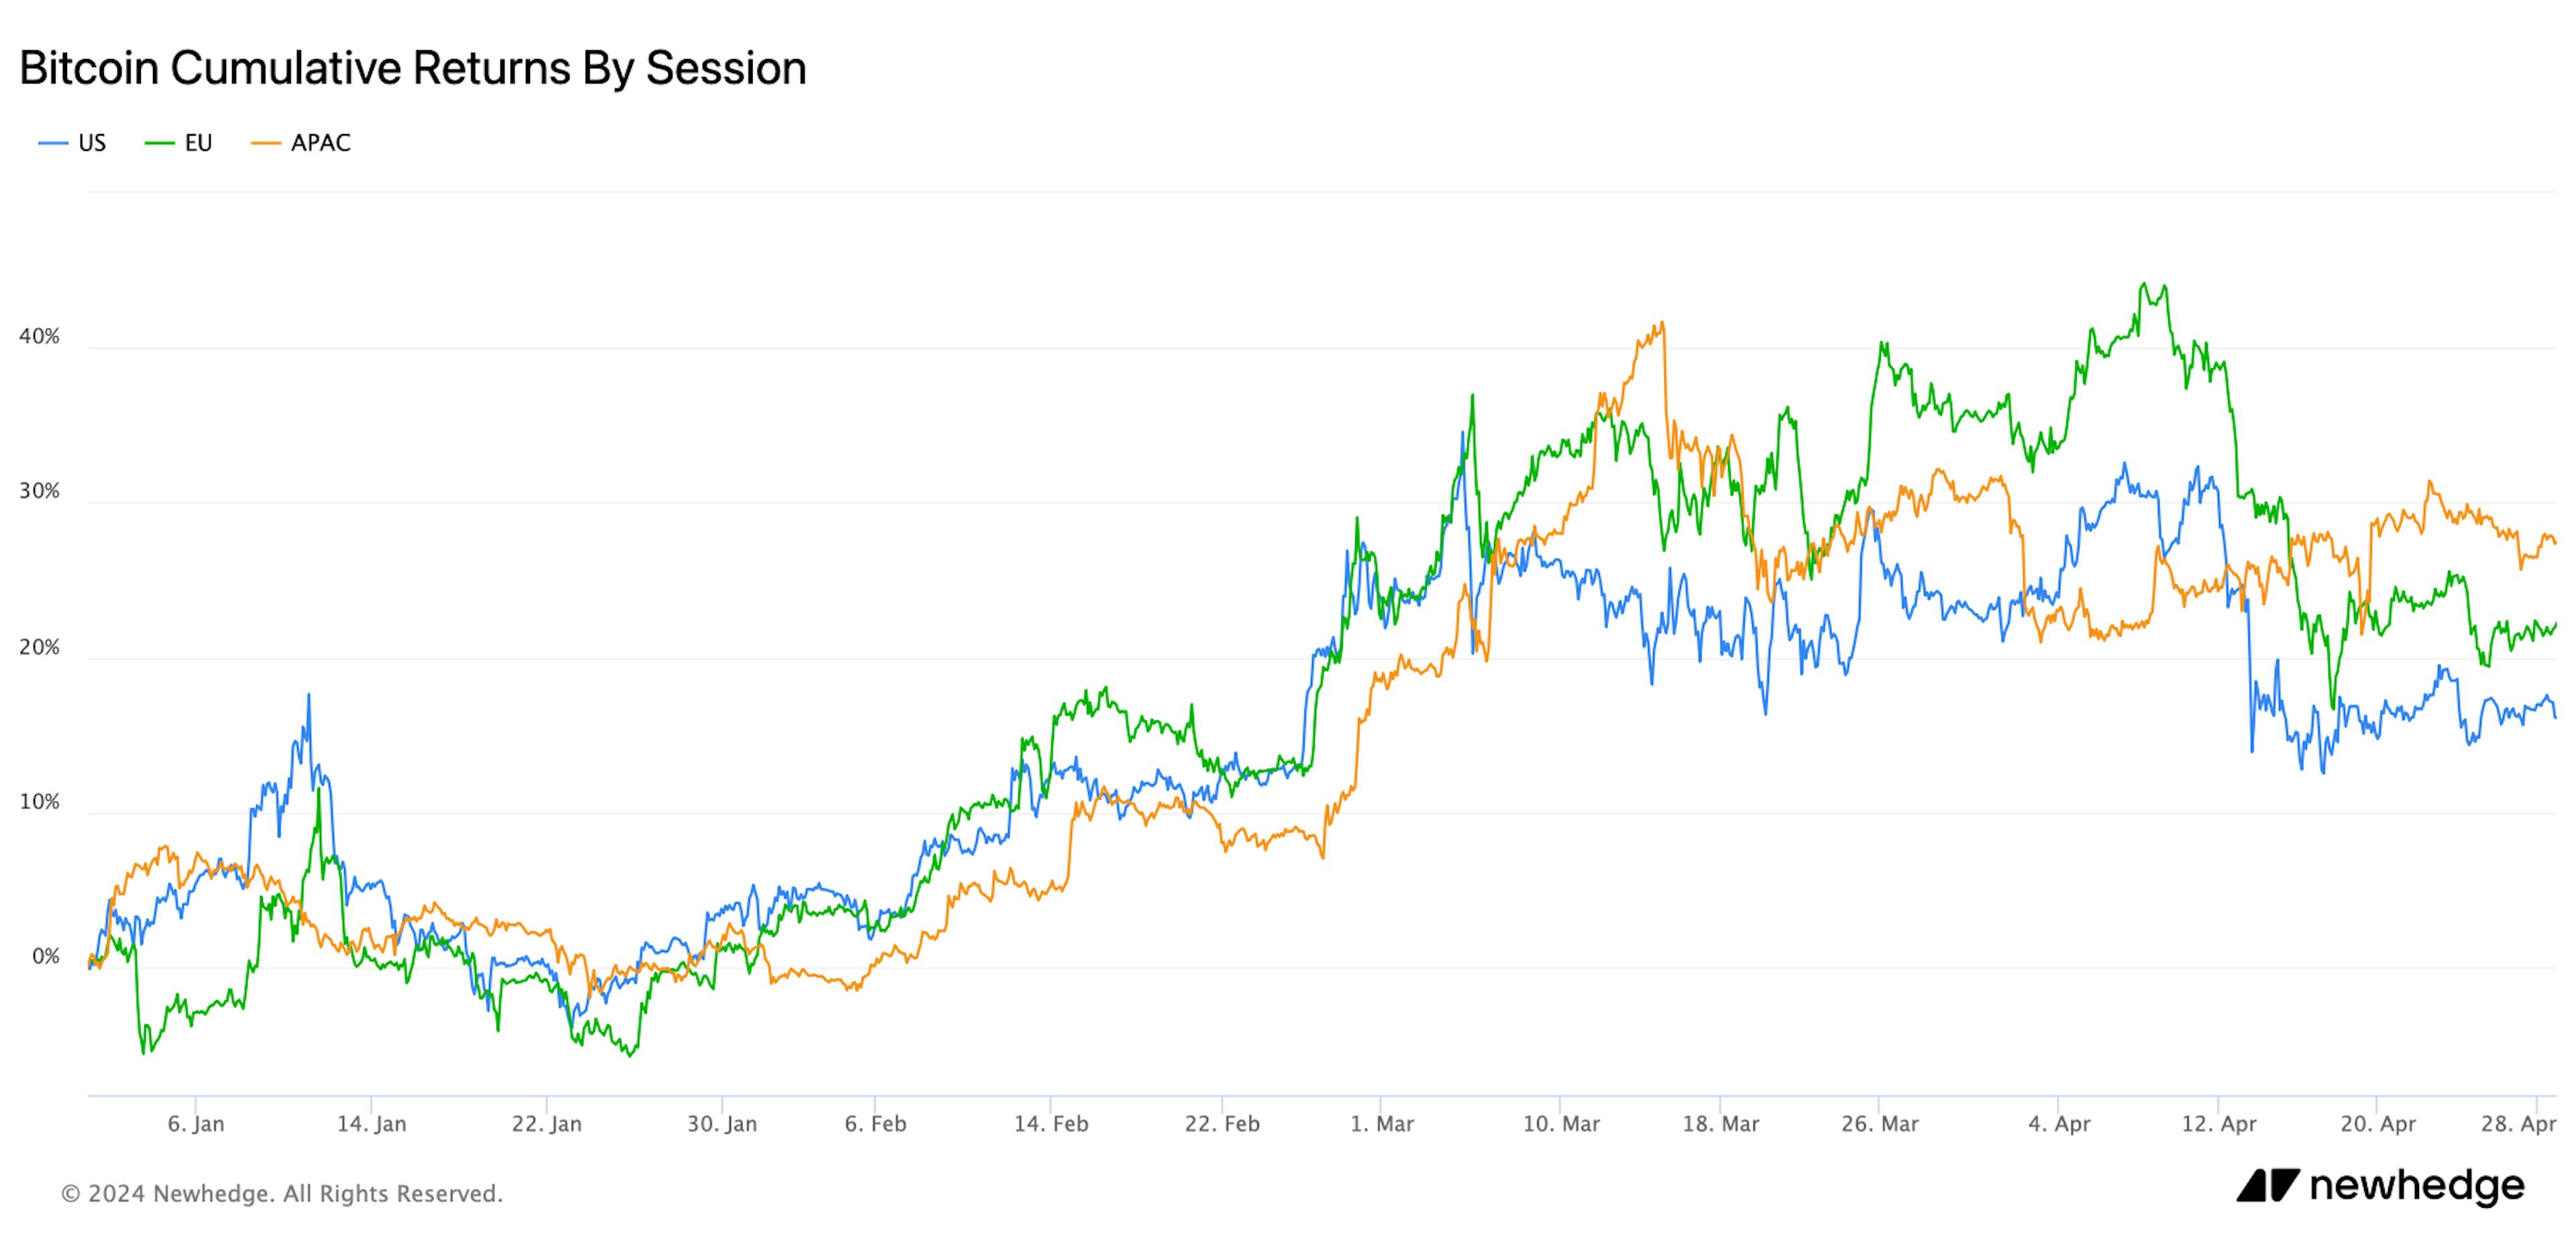 Bitcoin cumulative returns by session